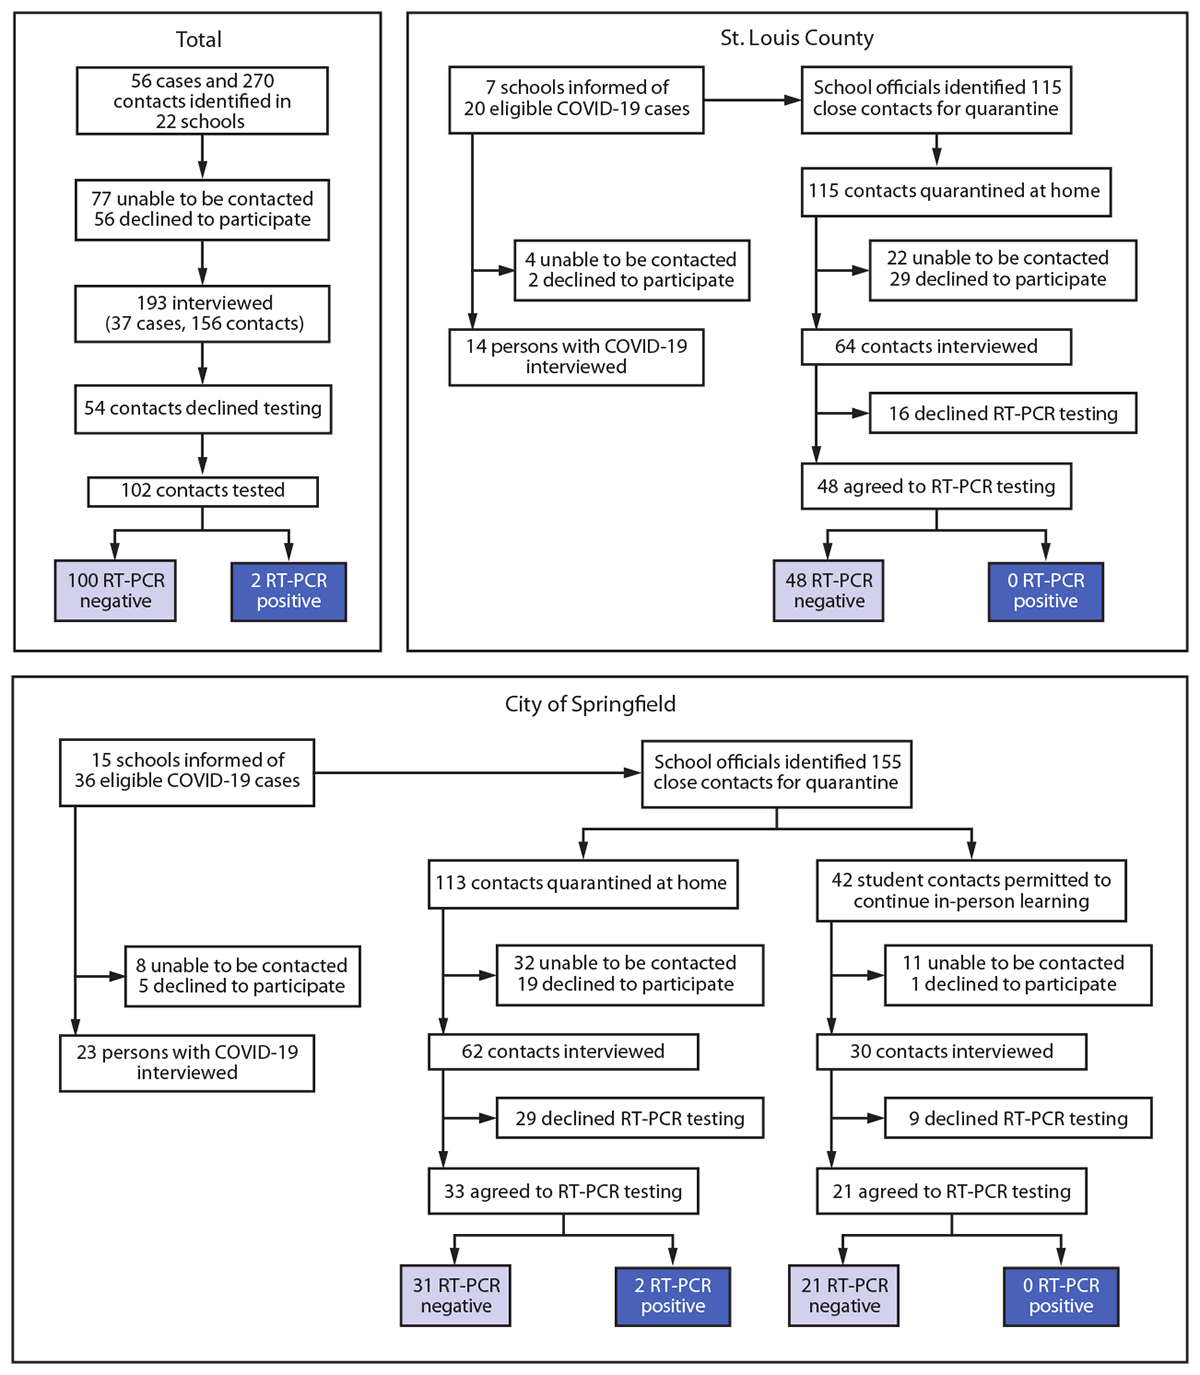 This figure is a flow chart showing the identification of 56 students teachers, and staff members with COVID-19 who had a total of 270 contacts with school-based exposure in 22 Missouri schools in December 2020, as well as the SARS-CoV-2 test results of the 102 contacts who received testing; two (2%26#37;) received positive SARS-CoV-2 test results.